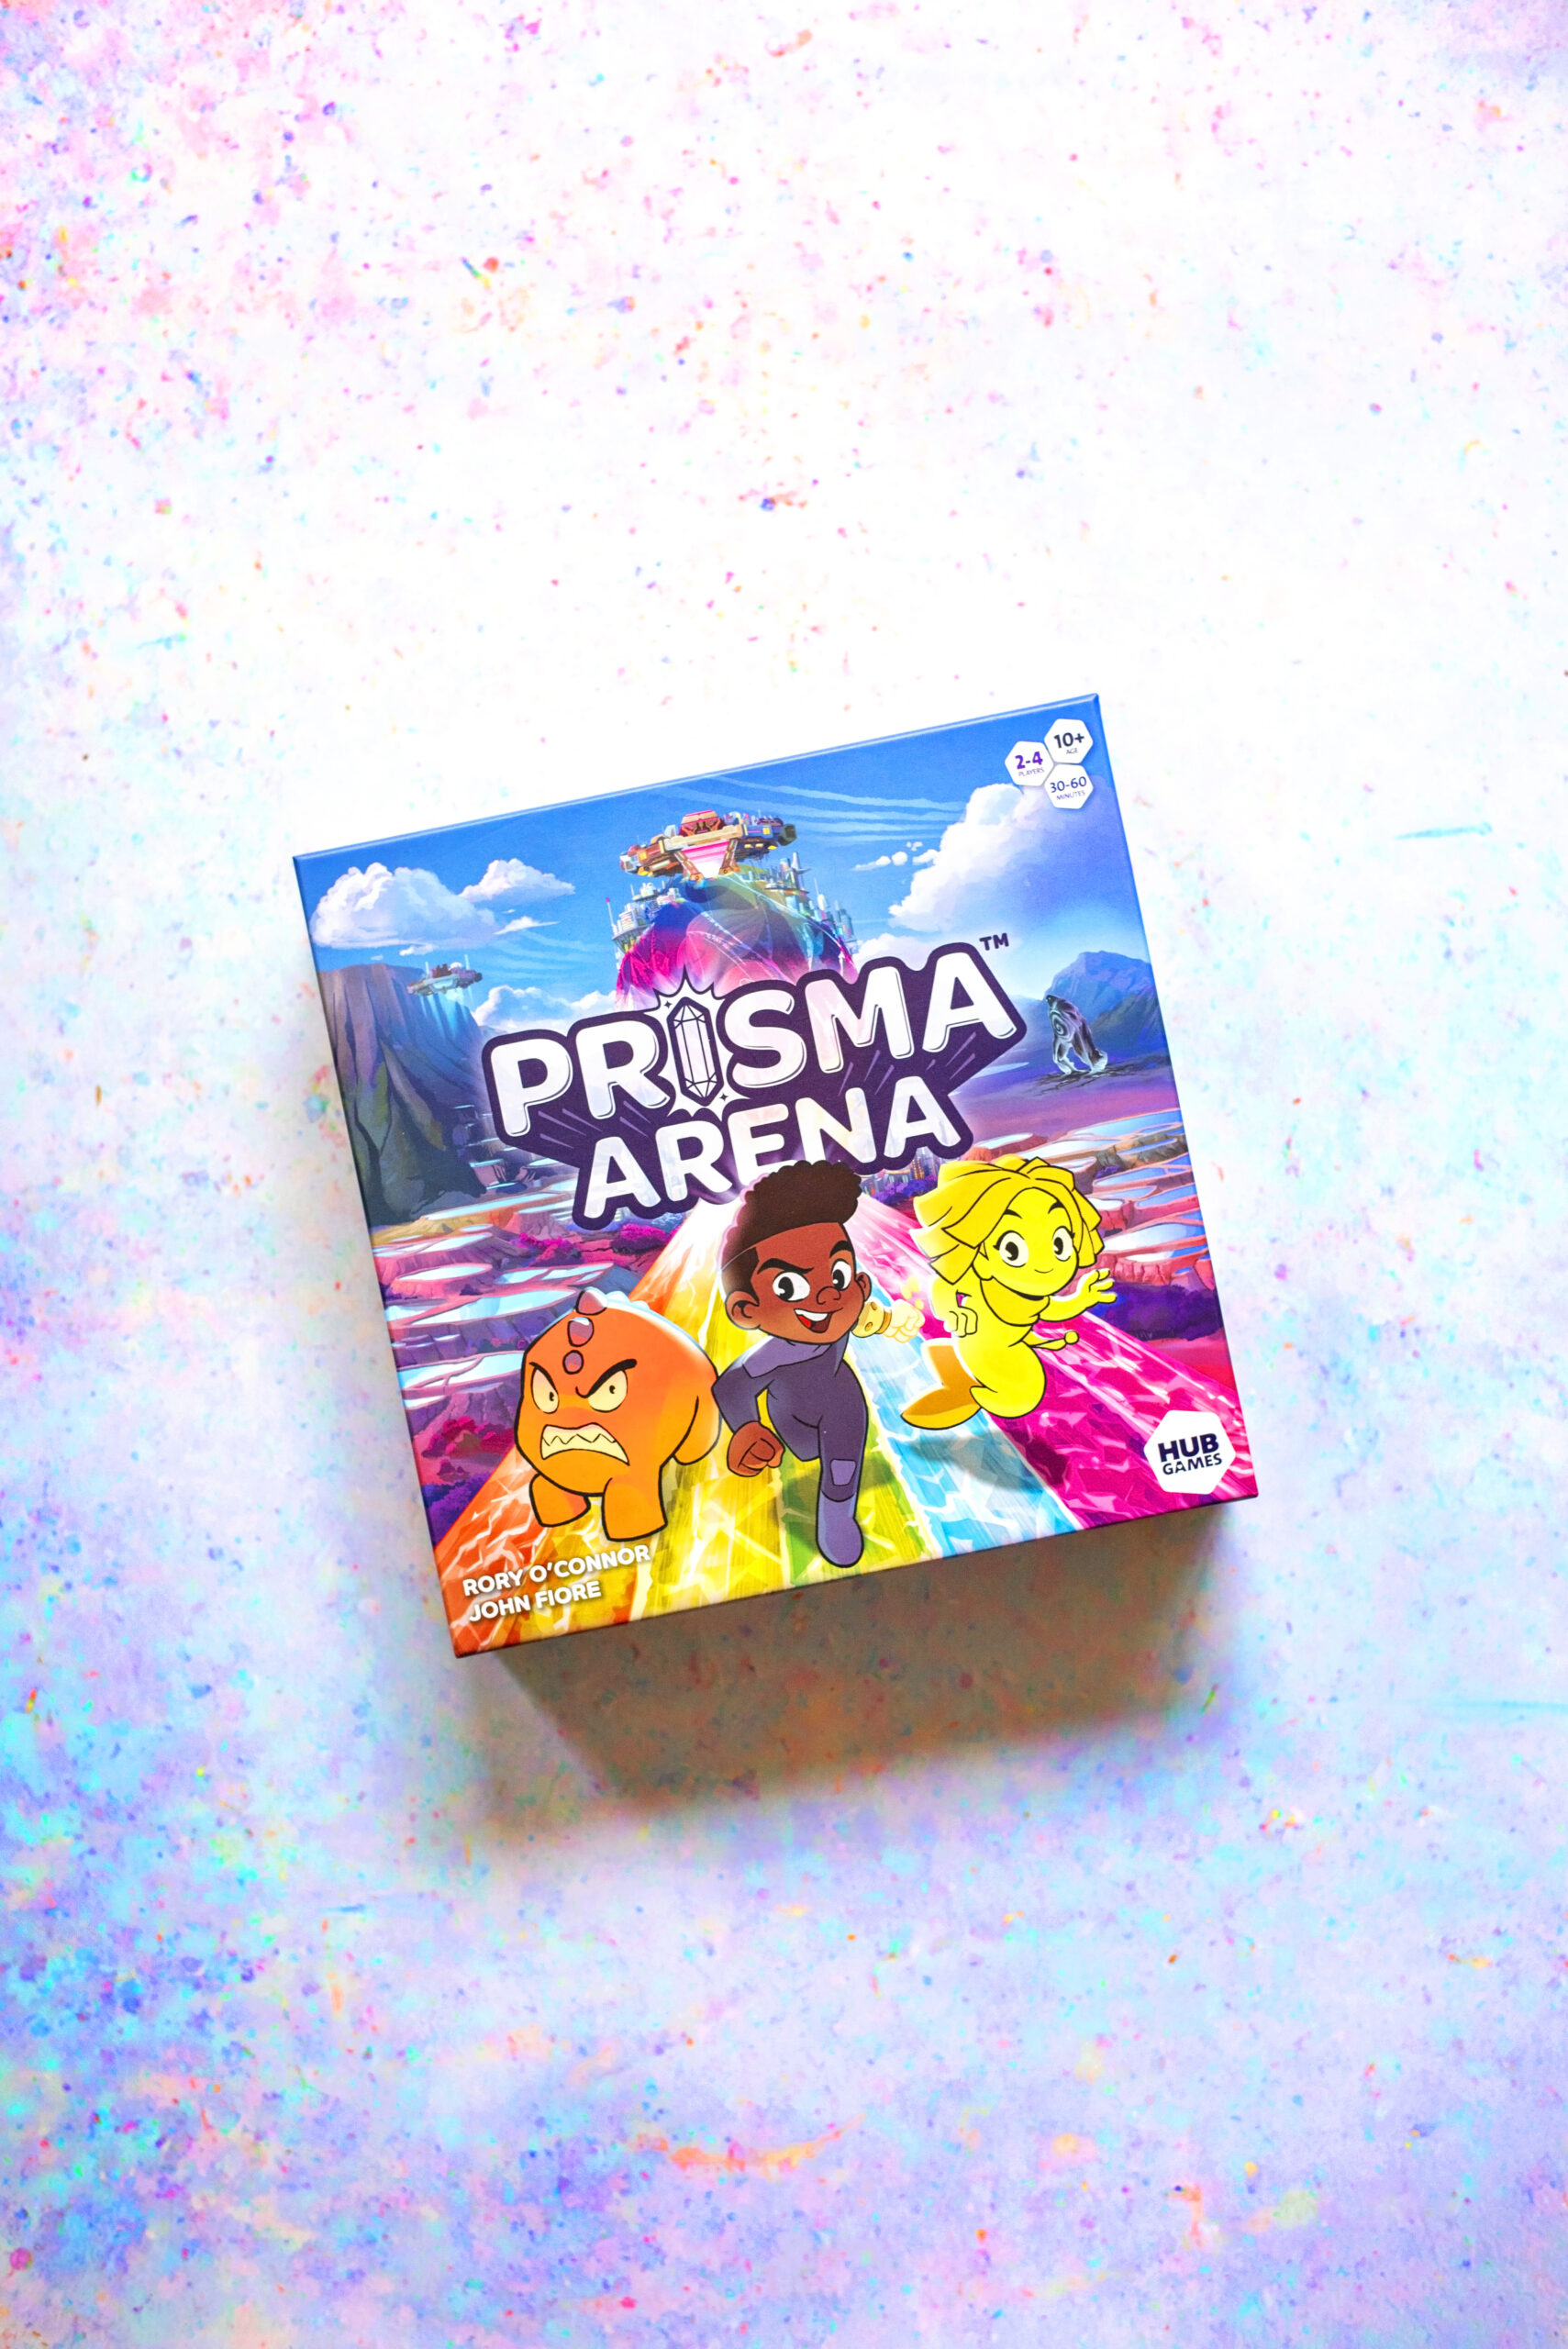 PRISMA ARENA from HUB GAMES